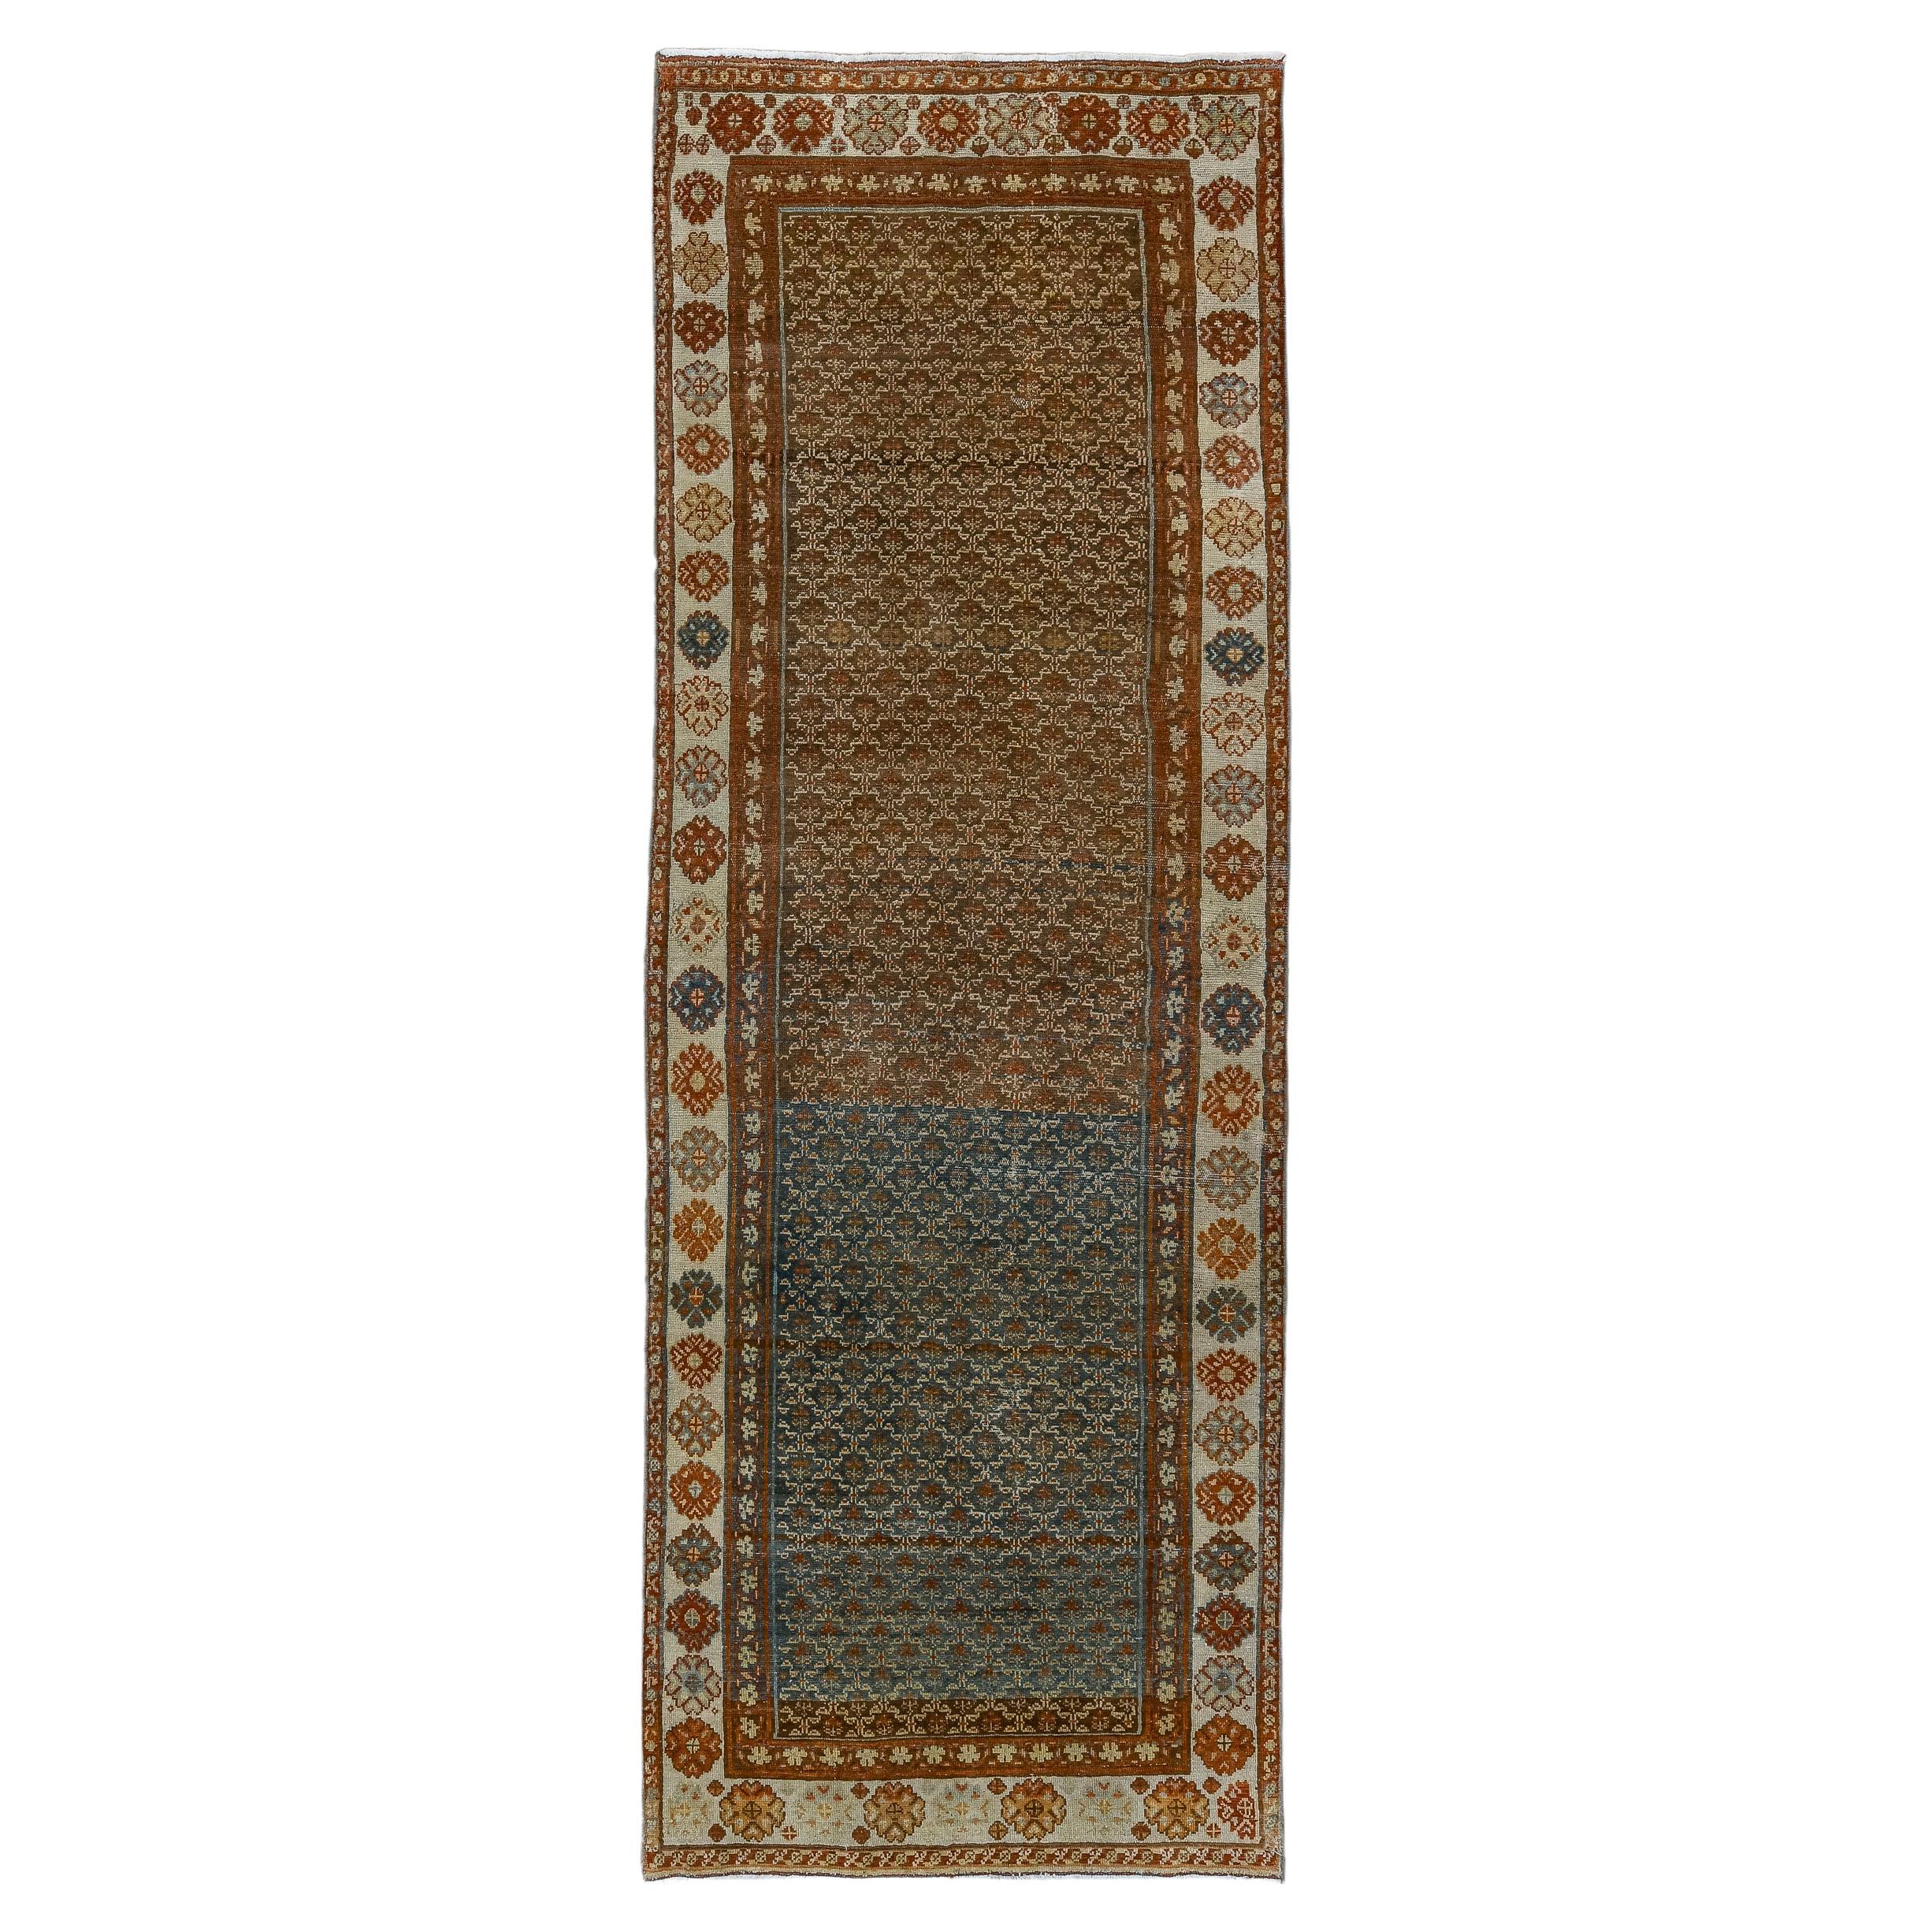 Antique Malayer Runner with Allover Diamond Design and Dark Colors